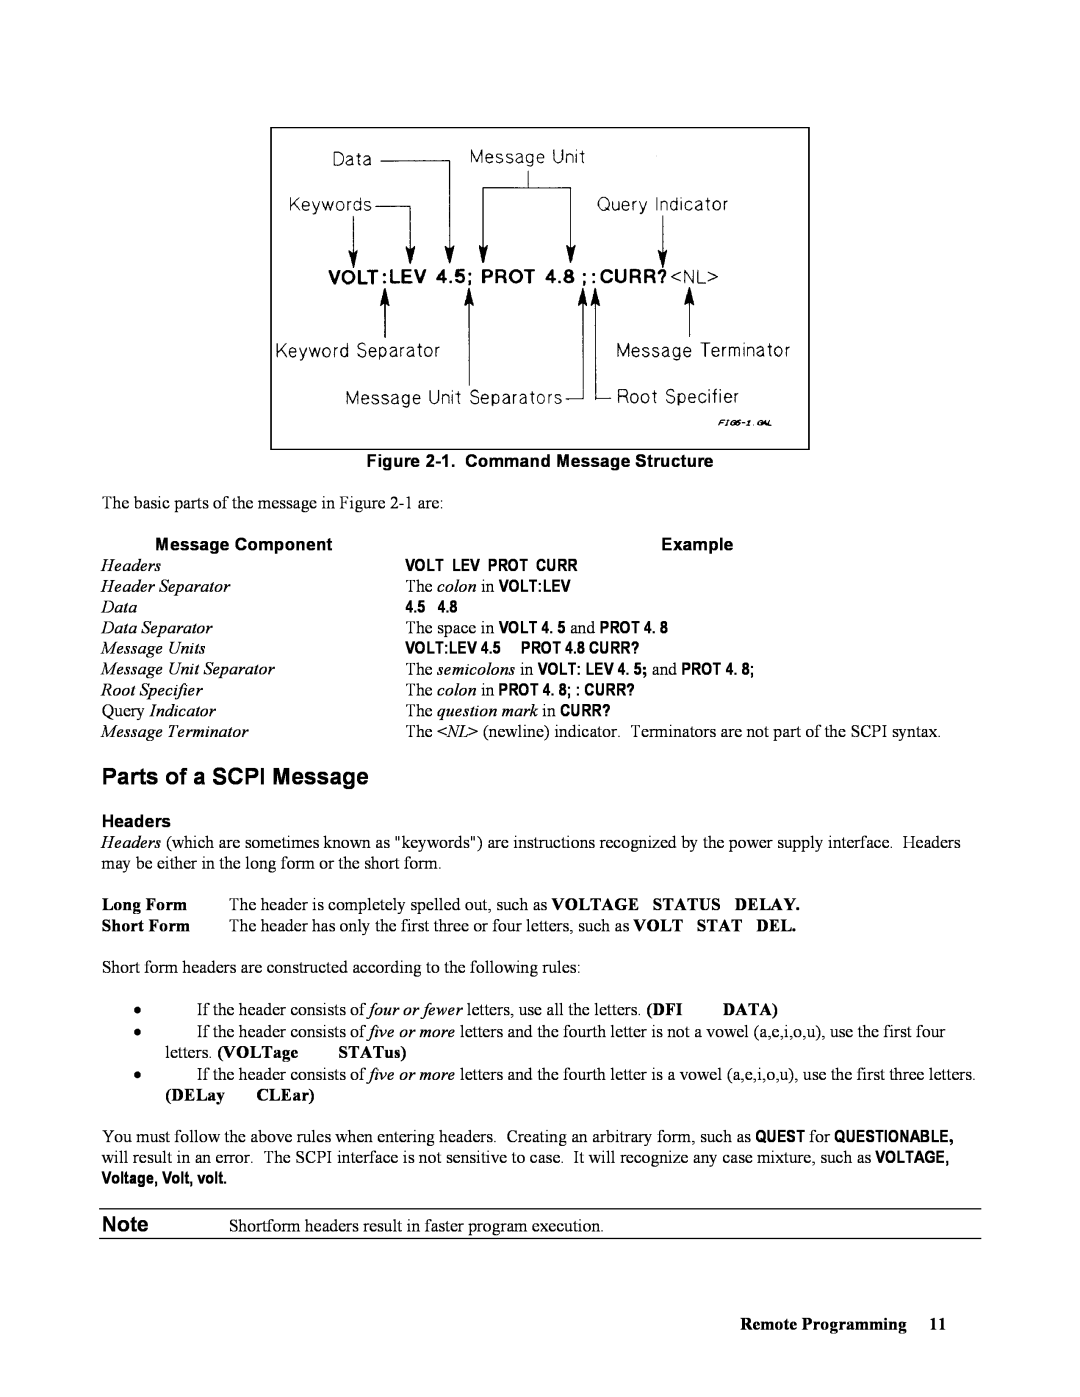 Agilent Technologies 664xA Parts of a SCPI Message, 1. Command Message Structure, Message Component, Example, Headers 